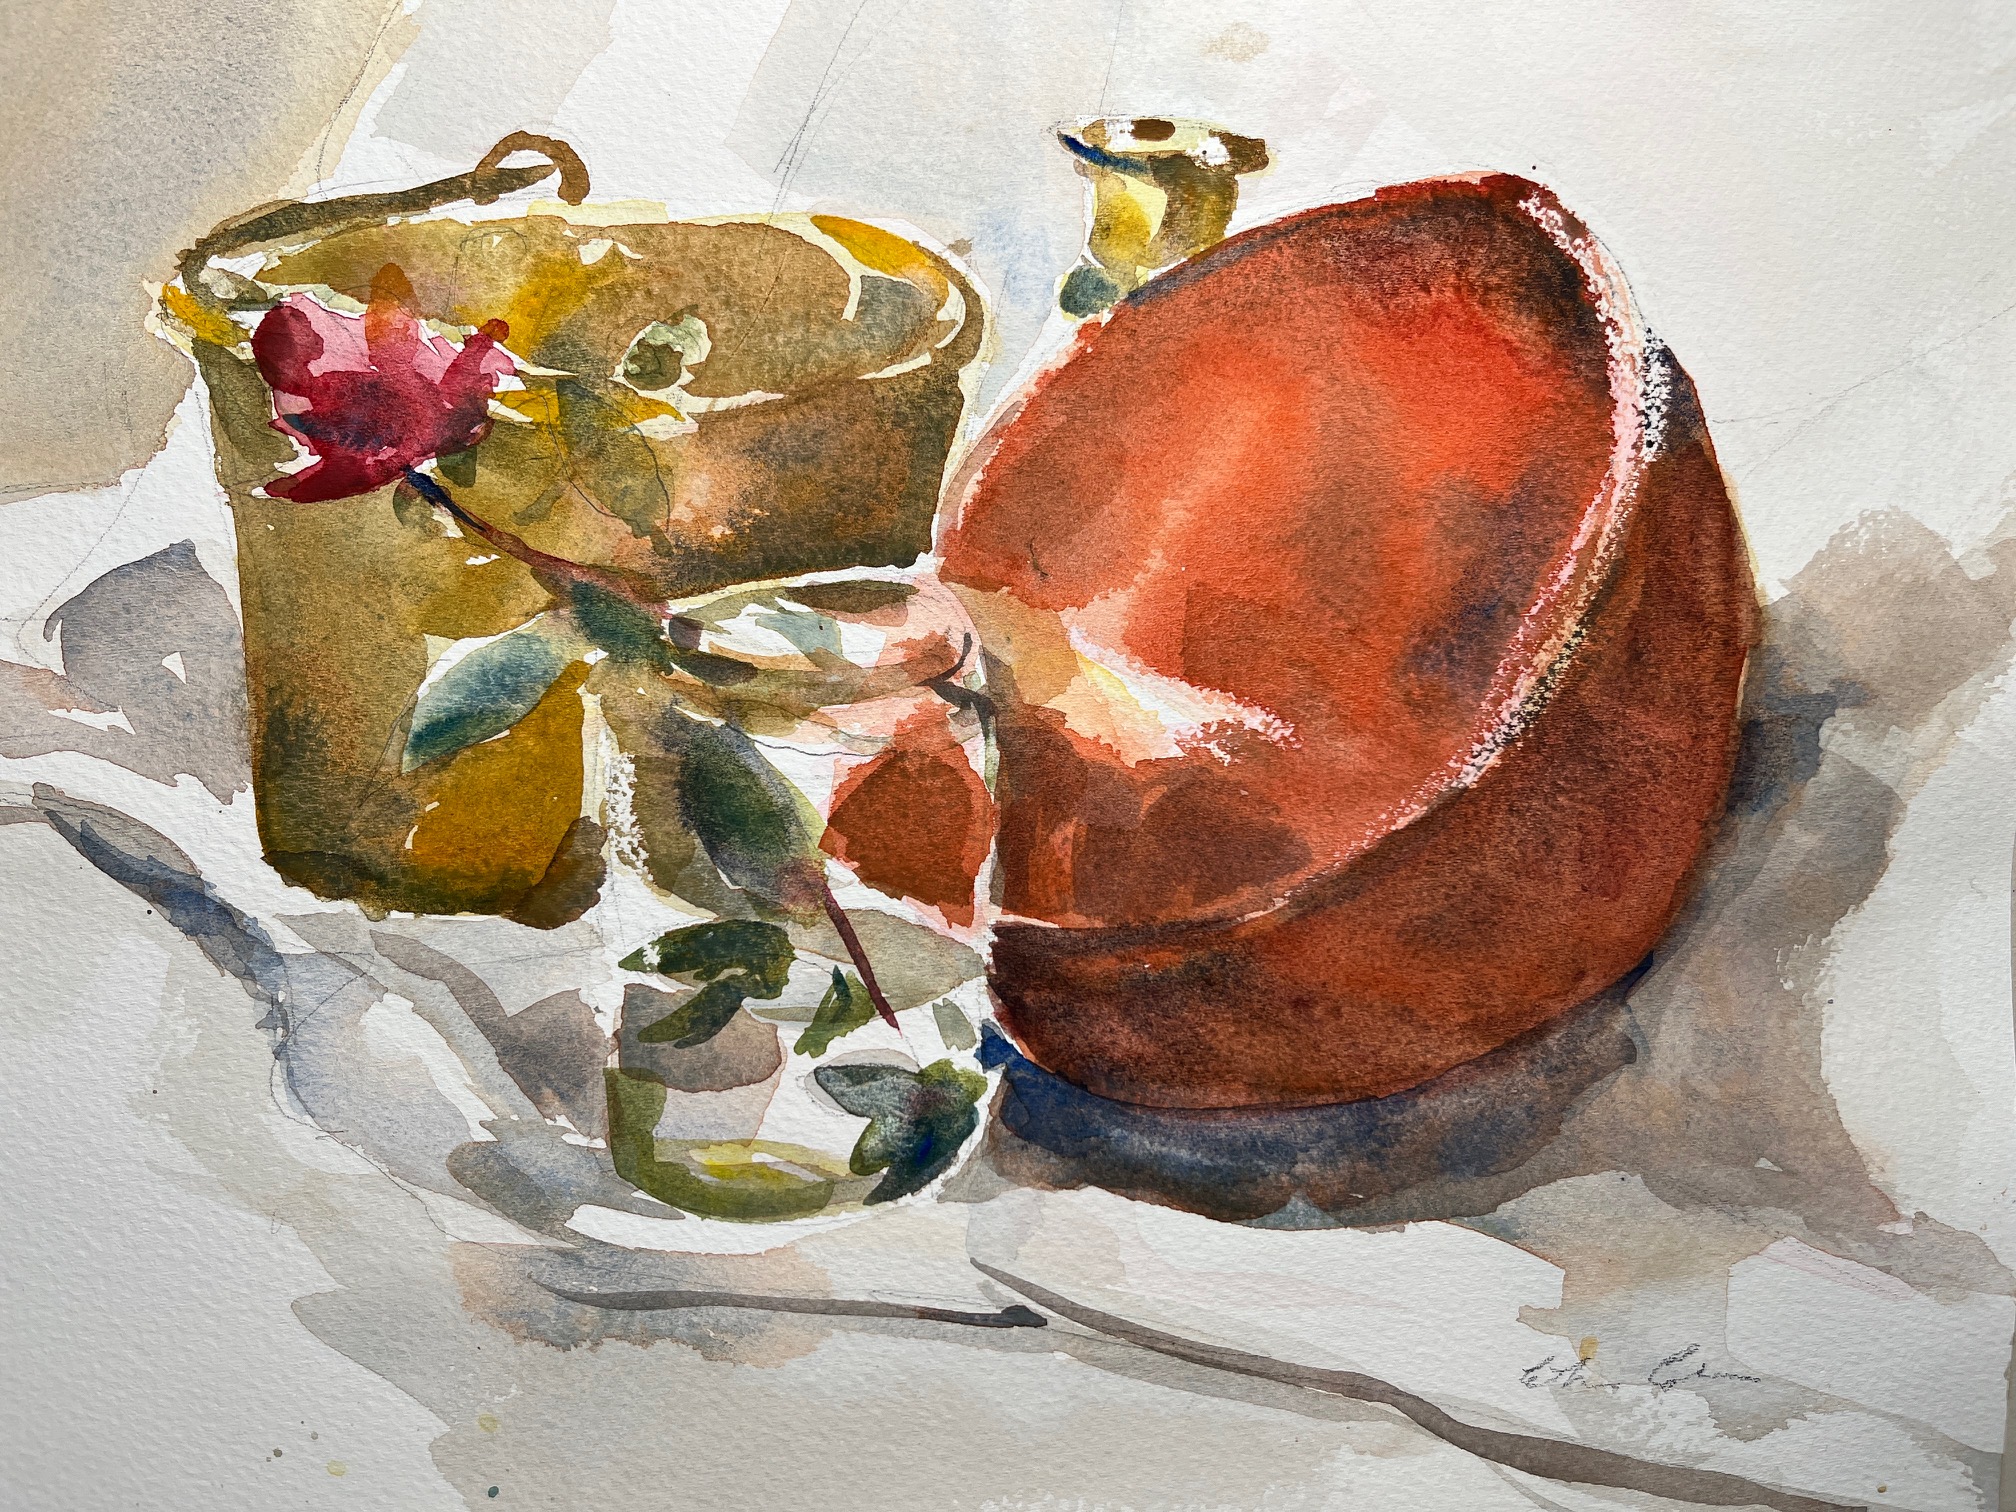 a watercolor still life with a flower in a glass of water in front of a red bowl